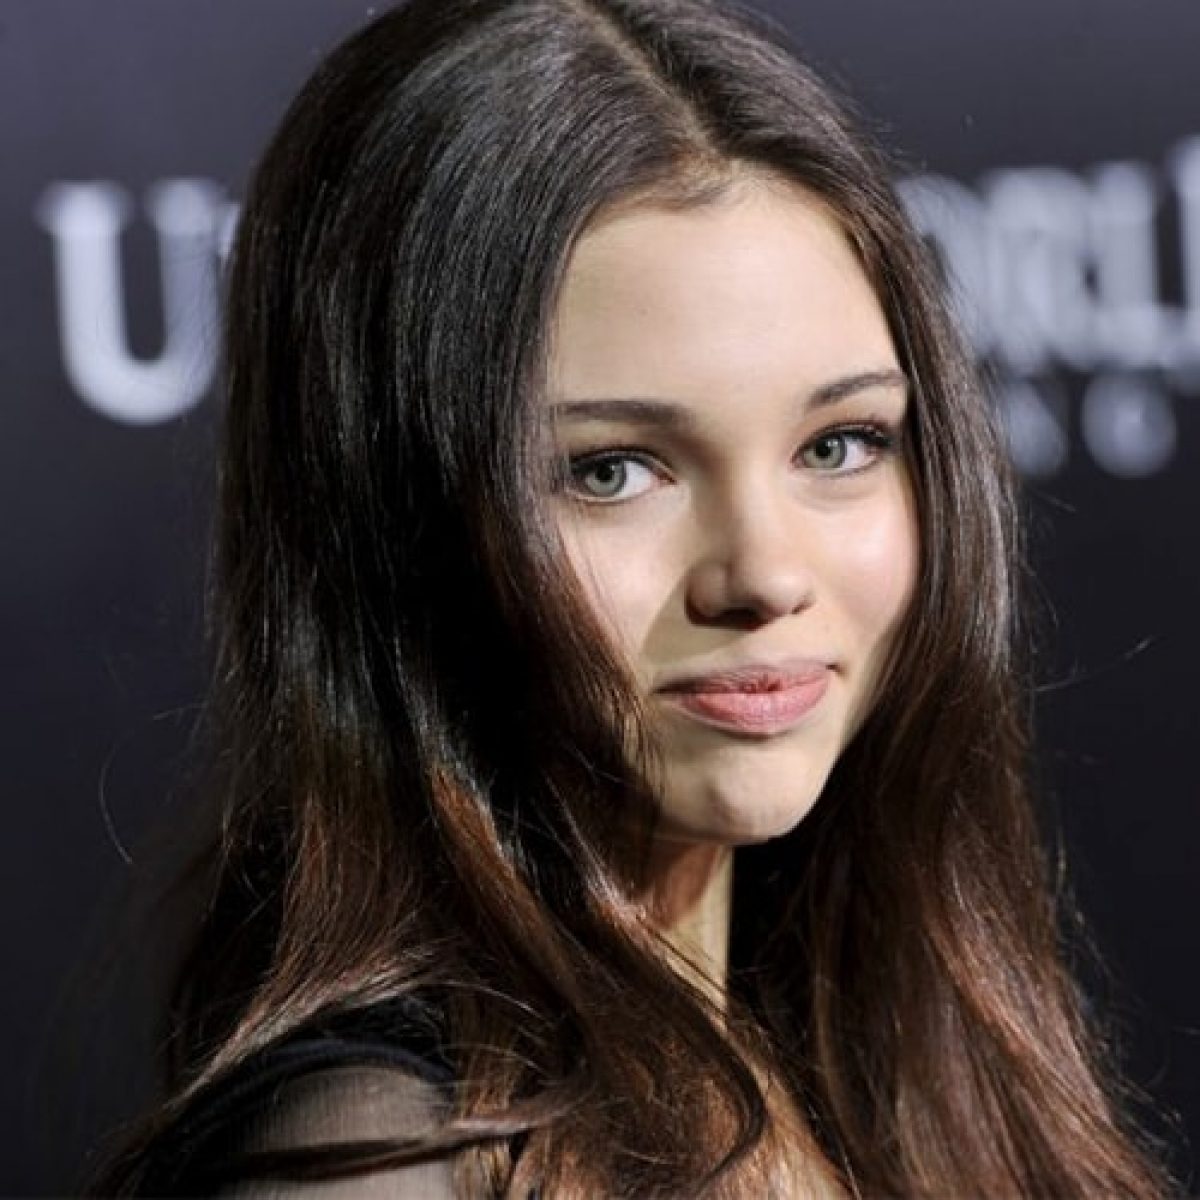 India Eisley : Date of Birth Age Horoscope Nationality Height. metrobiograp...